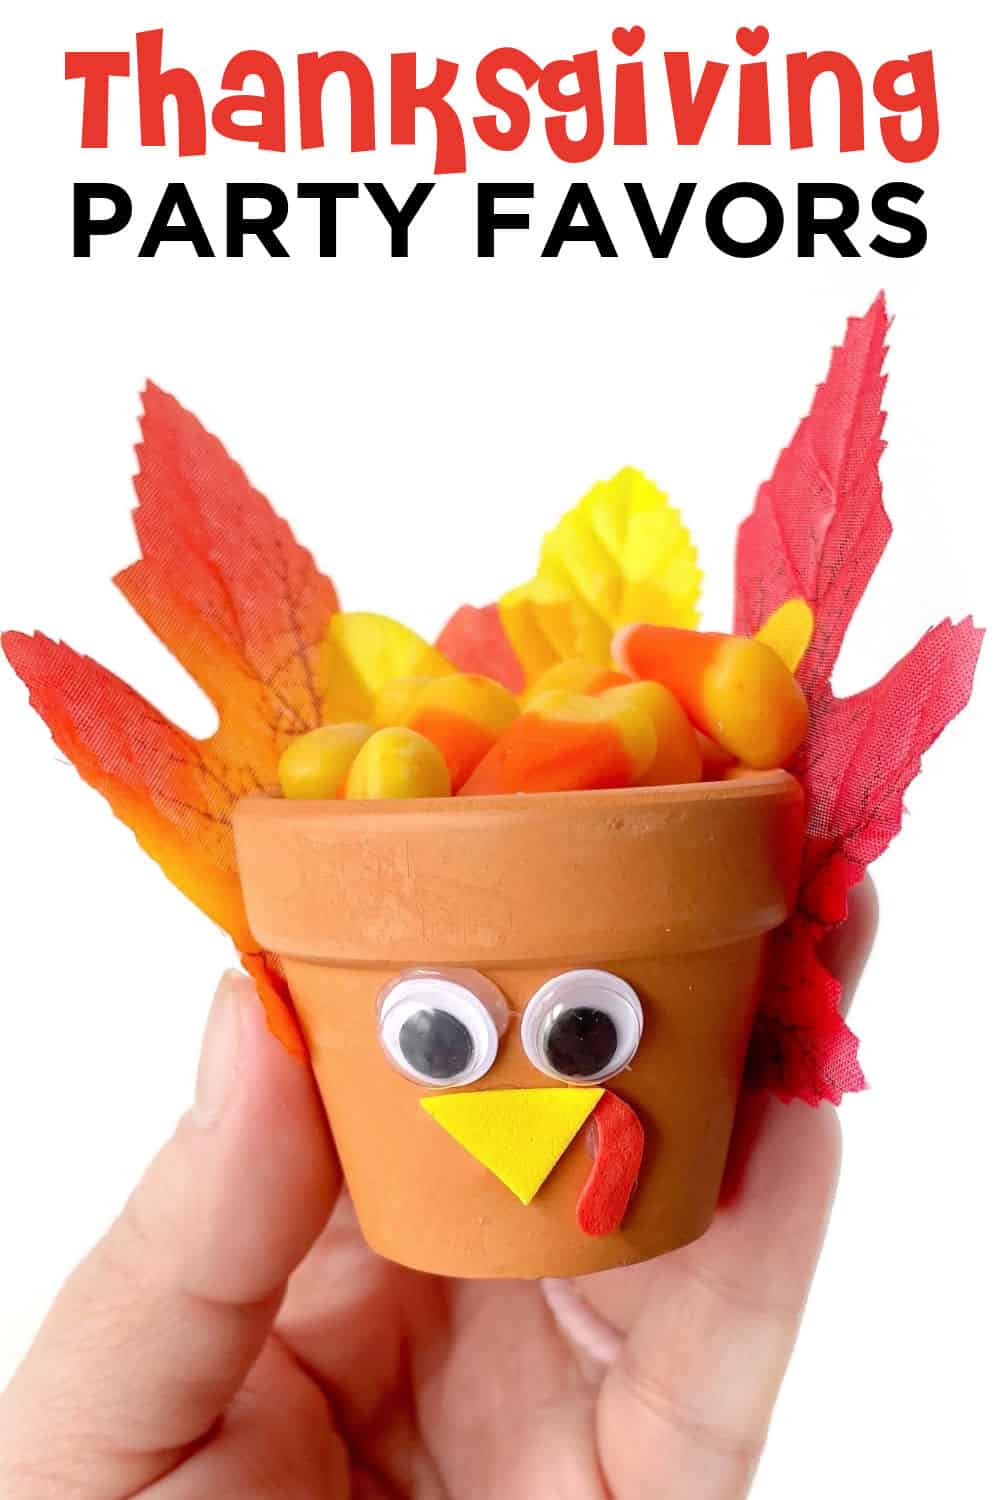 Thanksgiving Party Favors